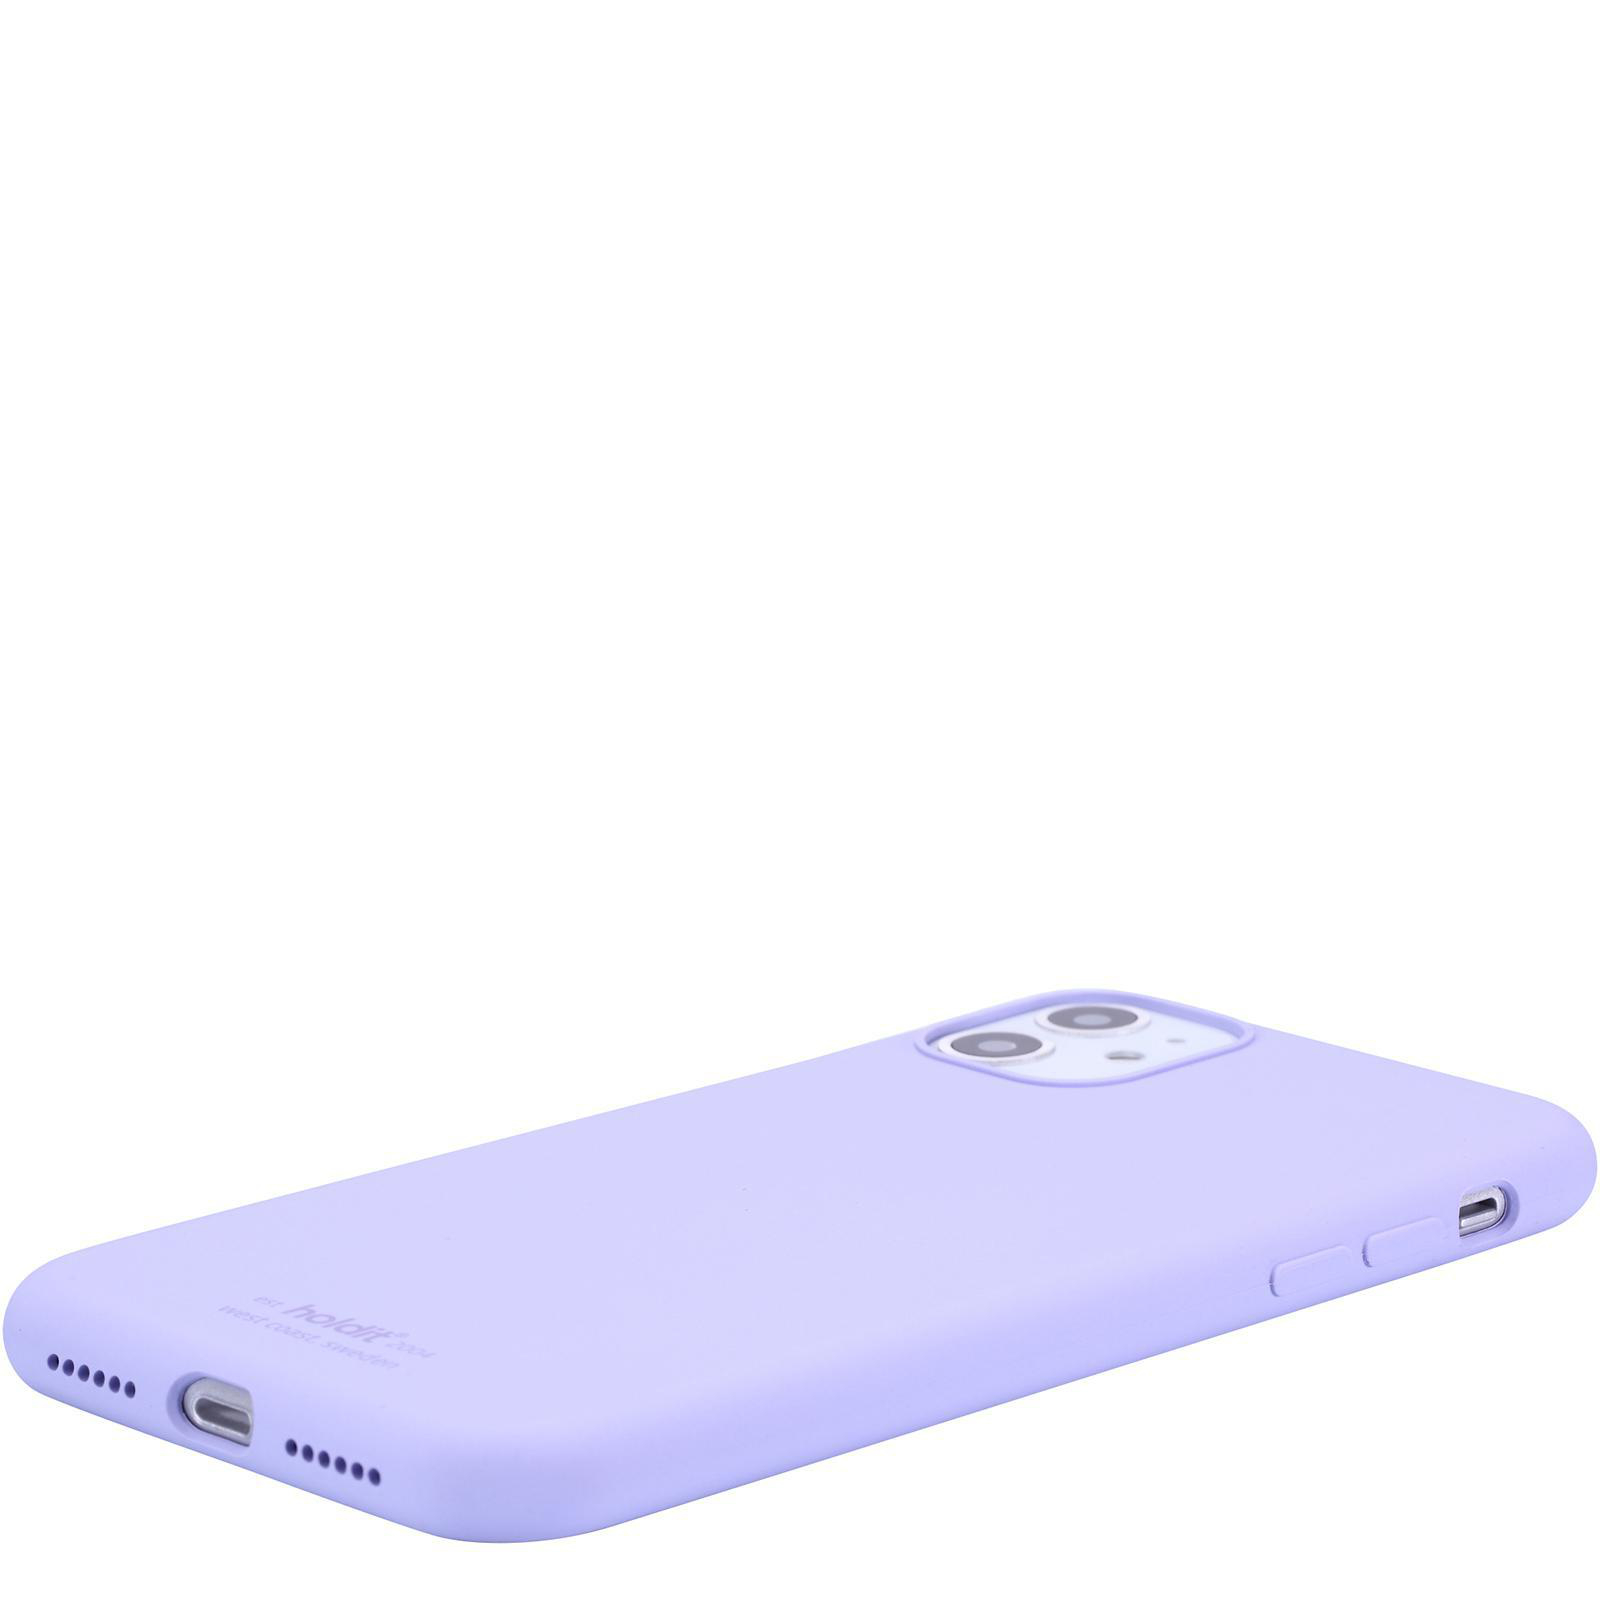 XR, Silicone, 11 Lavender Bookcover, iPhone Apple, HOLDIT